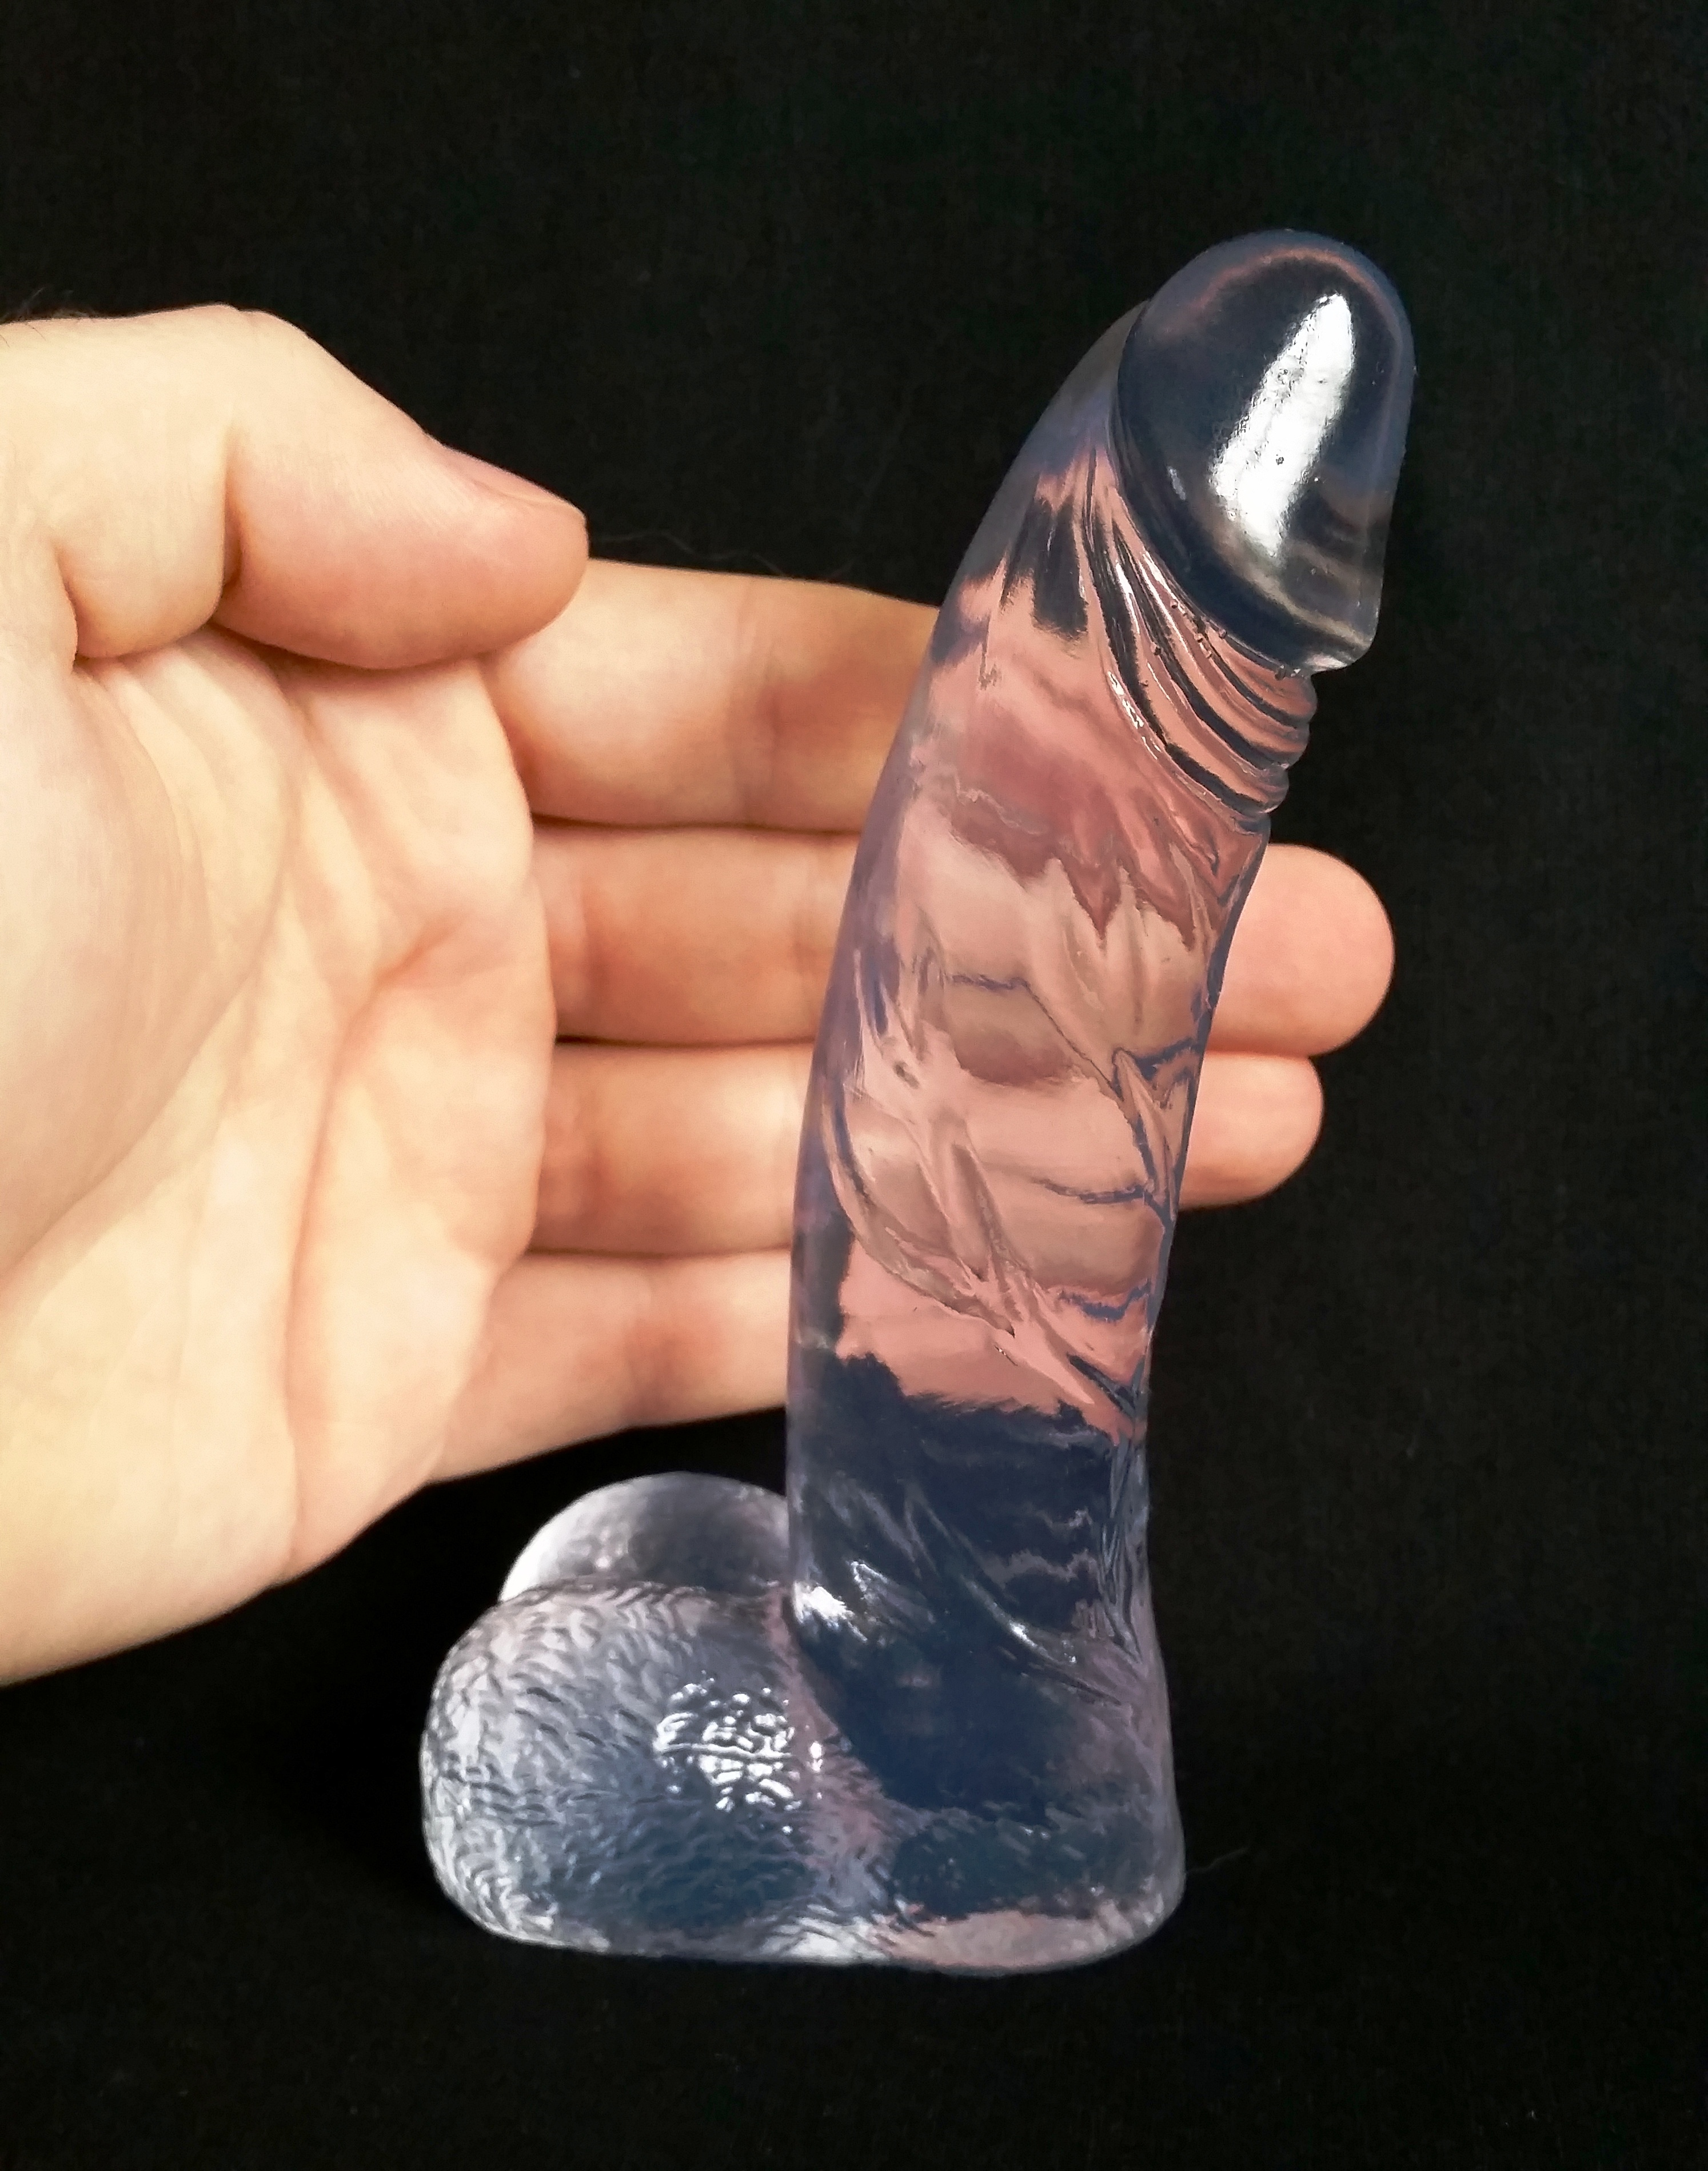 Dildo riding with pressure on face picture